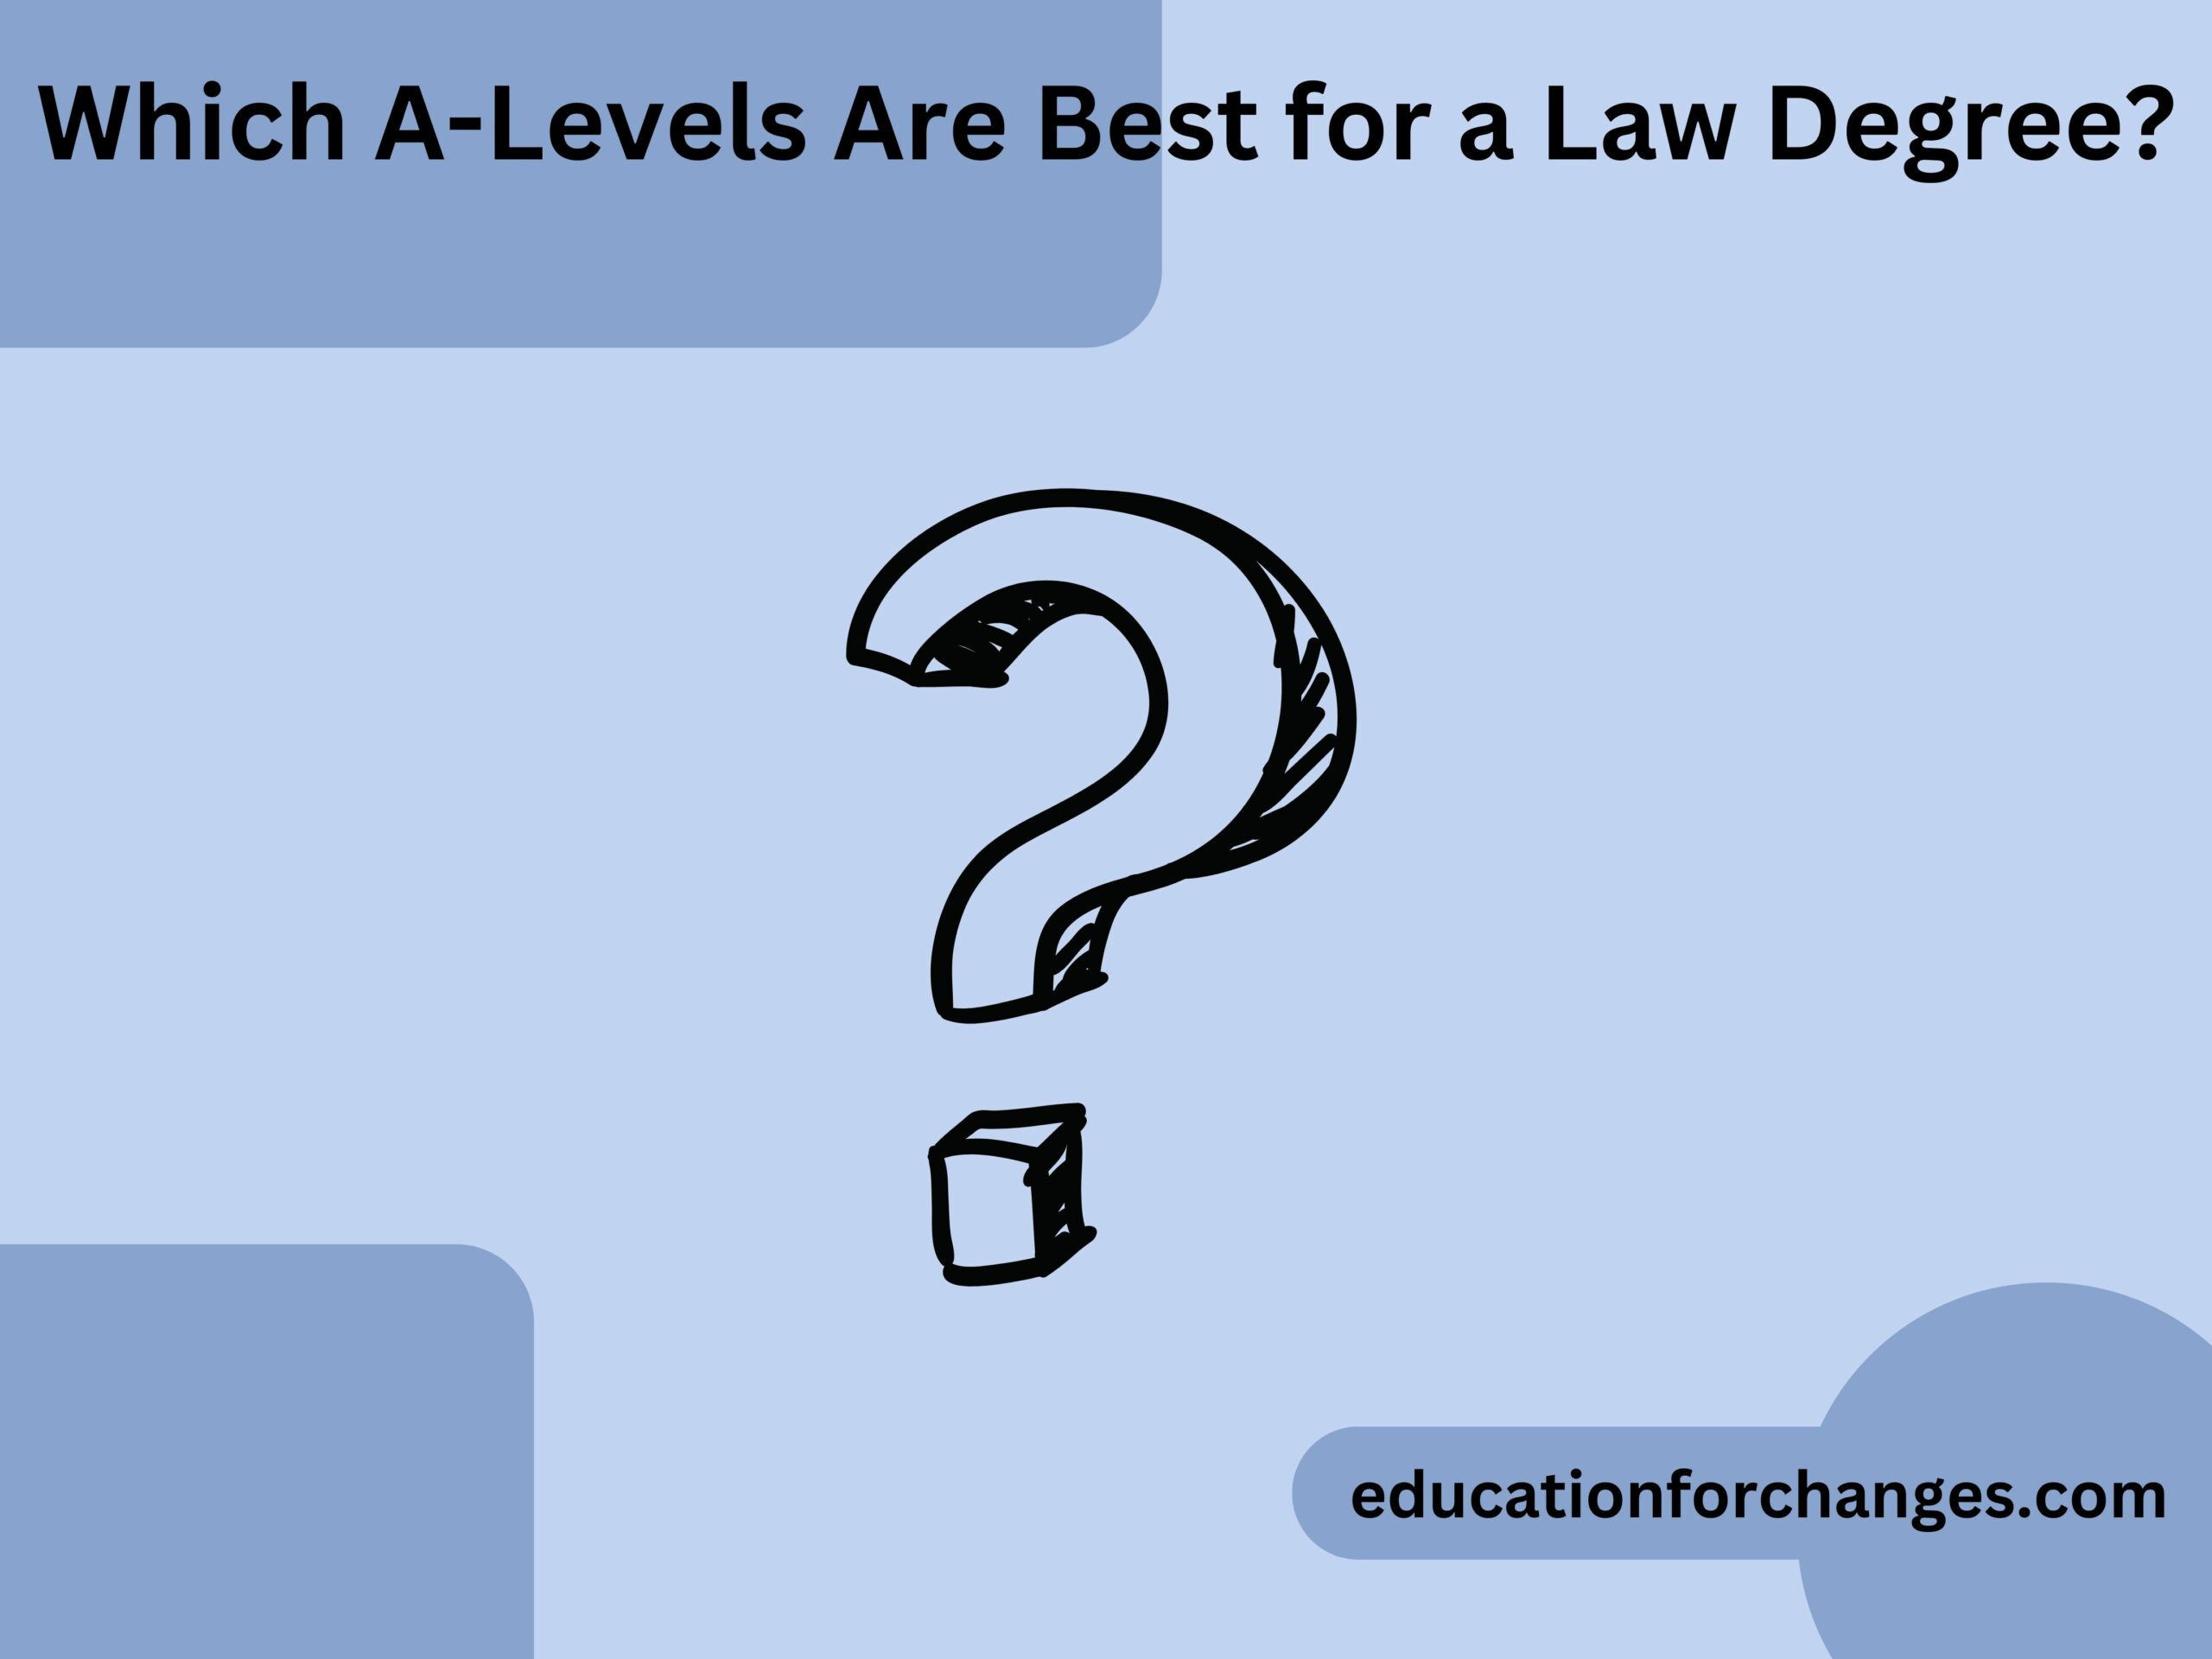 Which A-Levels Are Best for a Law Degree